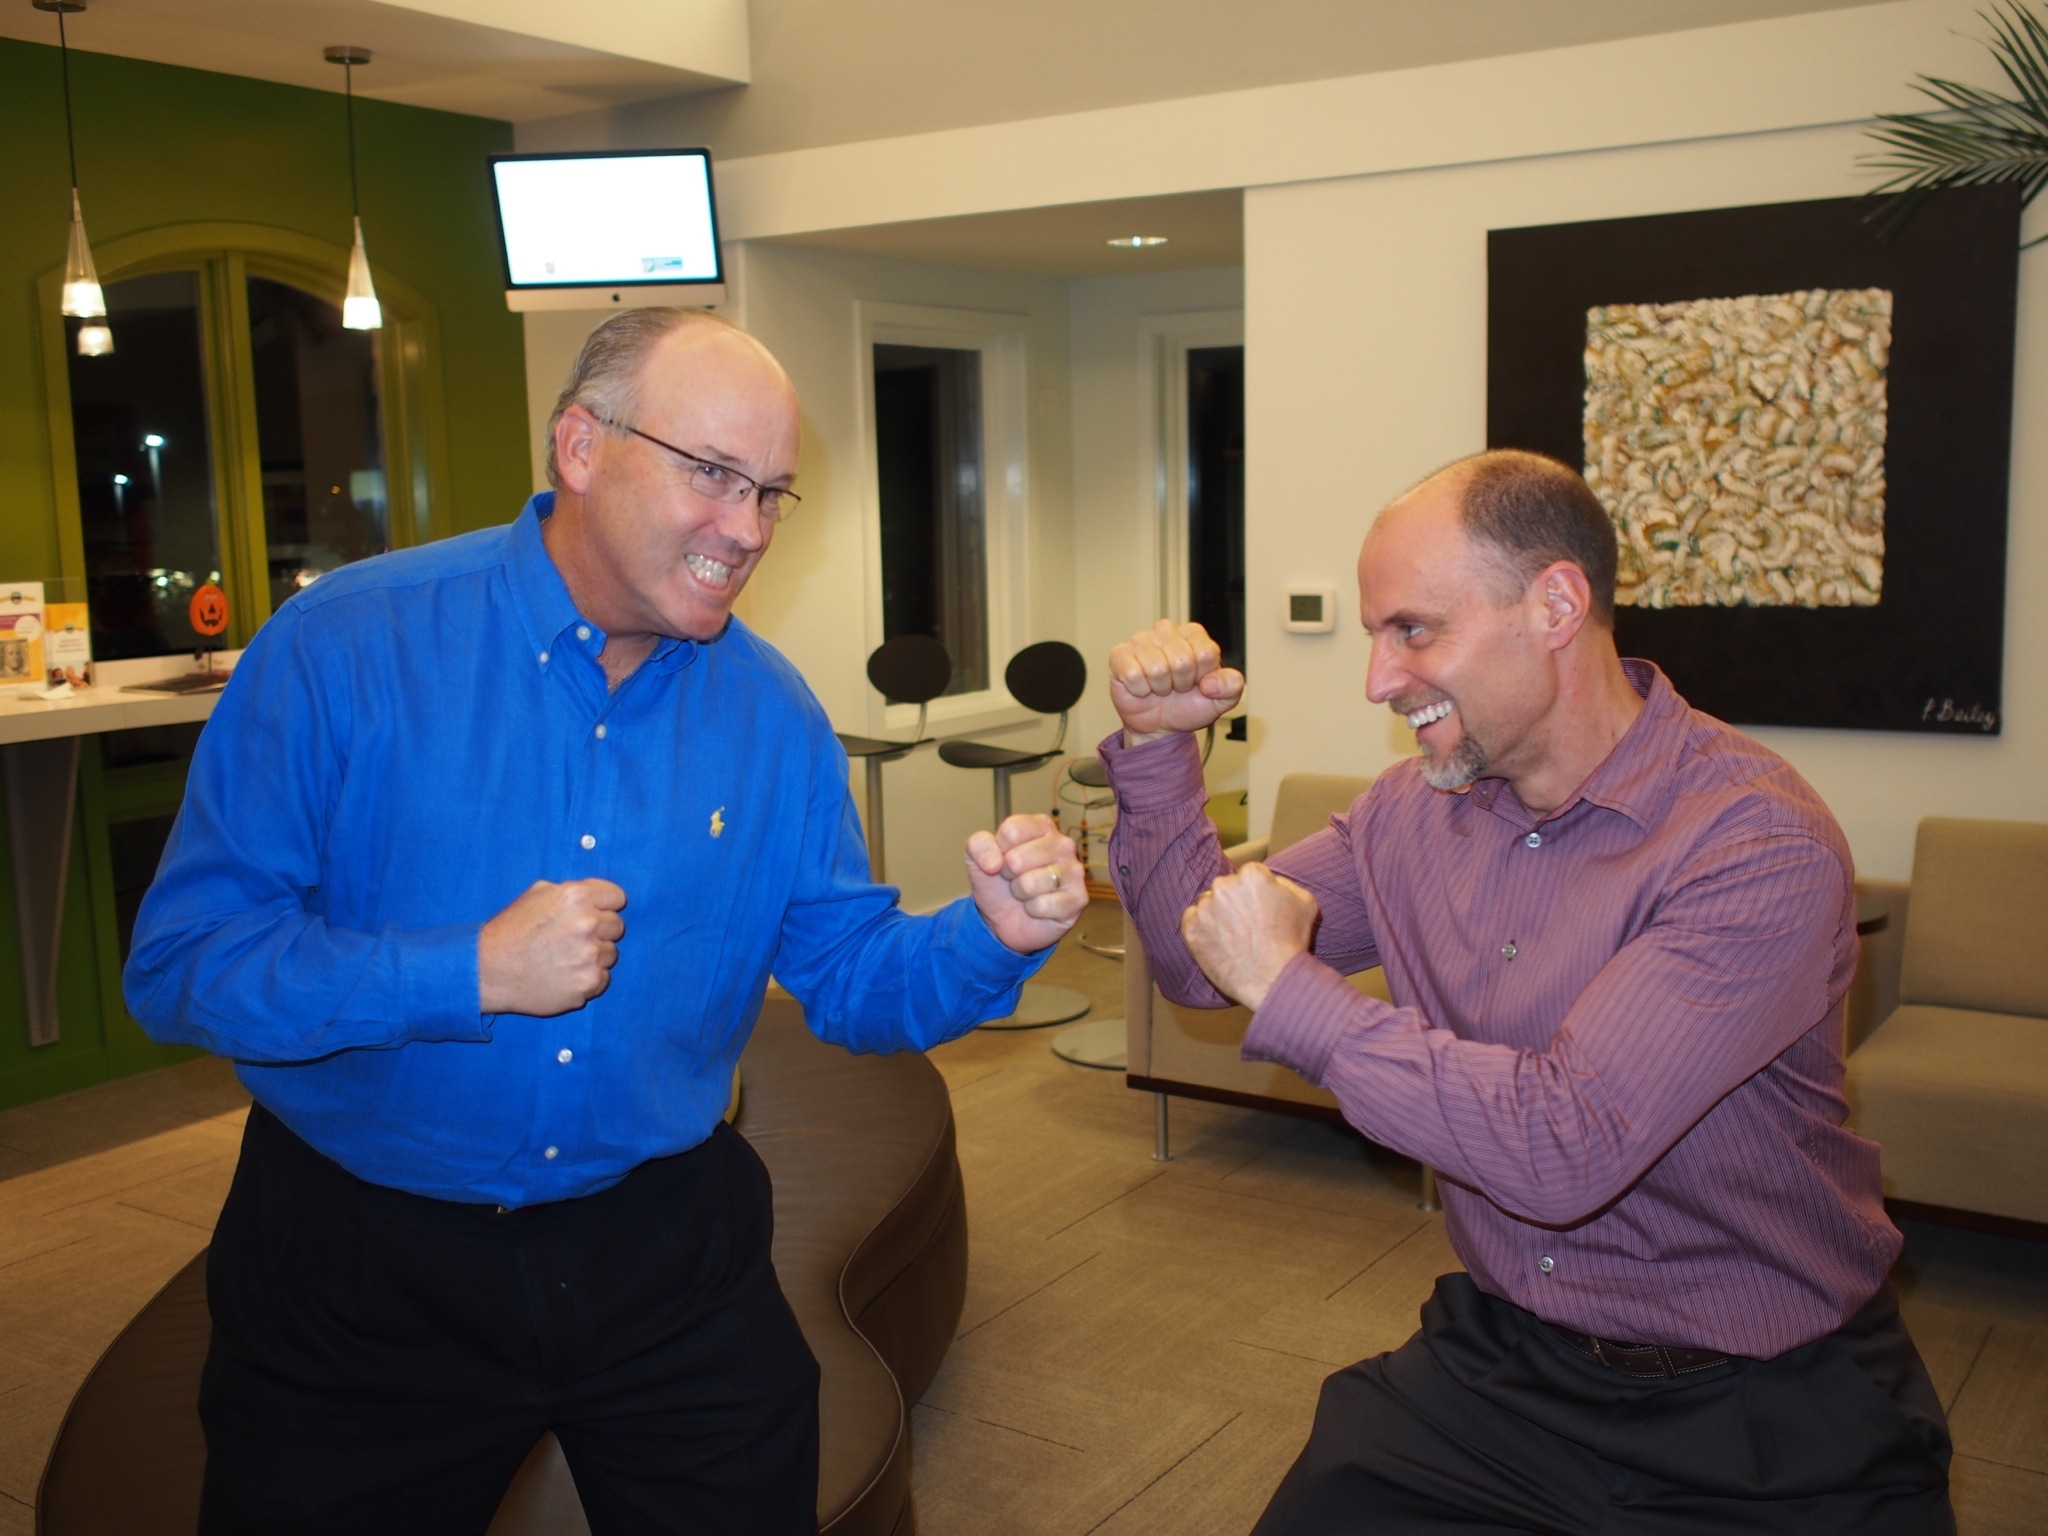 TOSC Members Dr. Colville and Dr. Salome demonstrate their desire to win The Great Debate at the next TOSC Annual Meeting in Austin, Feb. 21-23. Don't miss it!